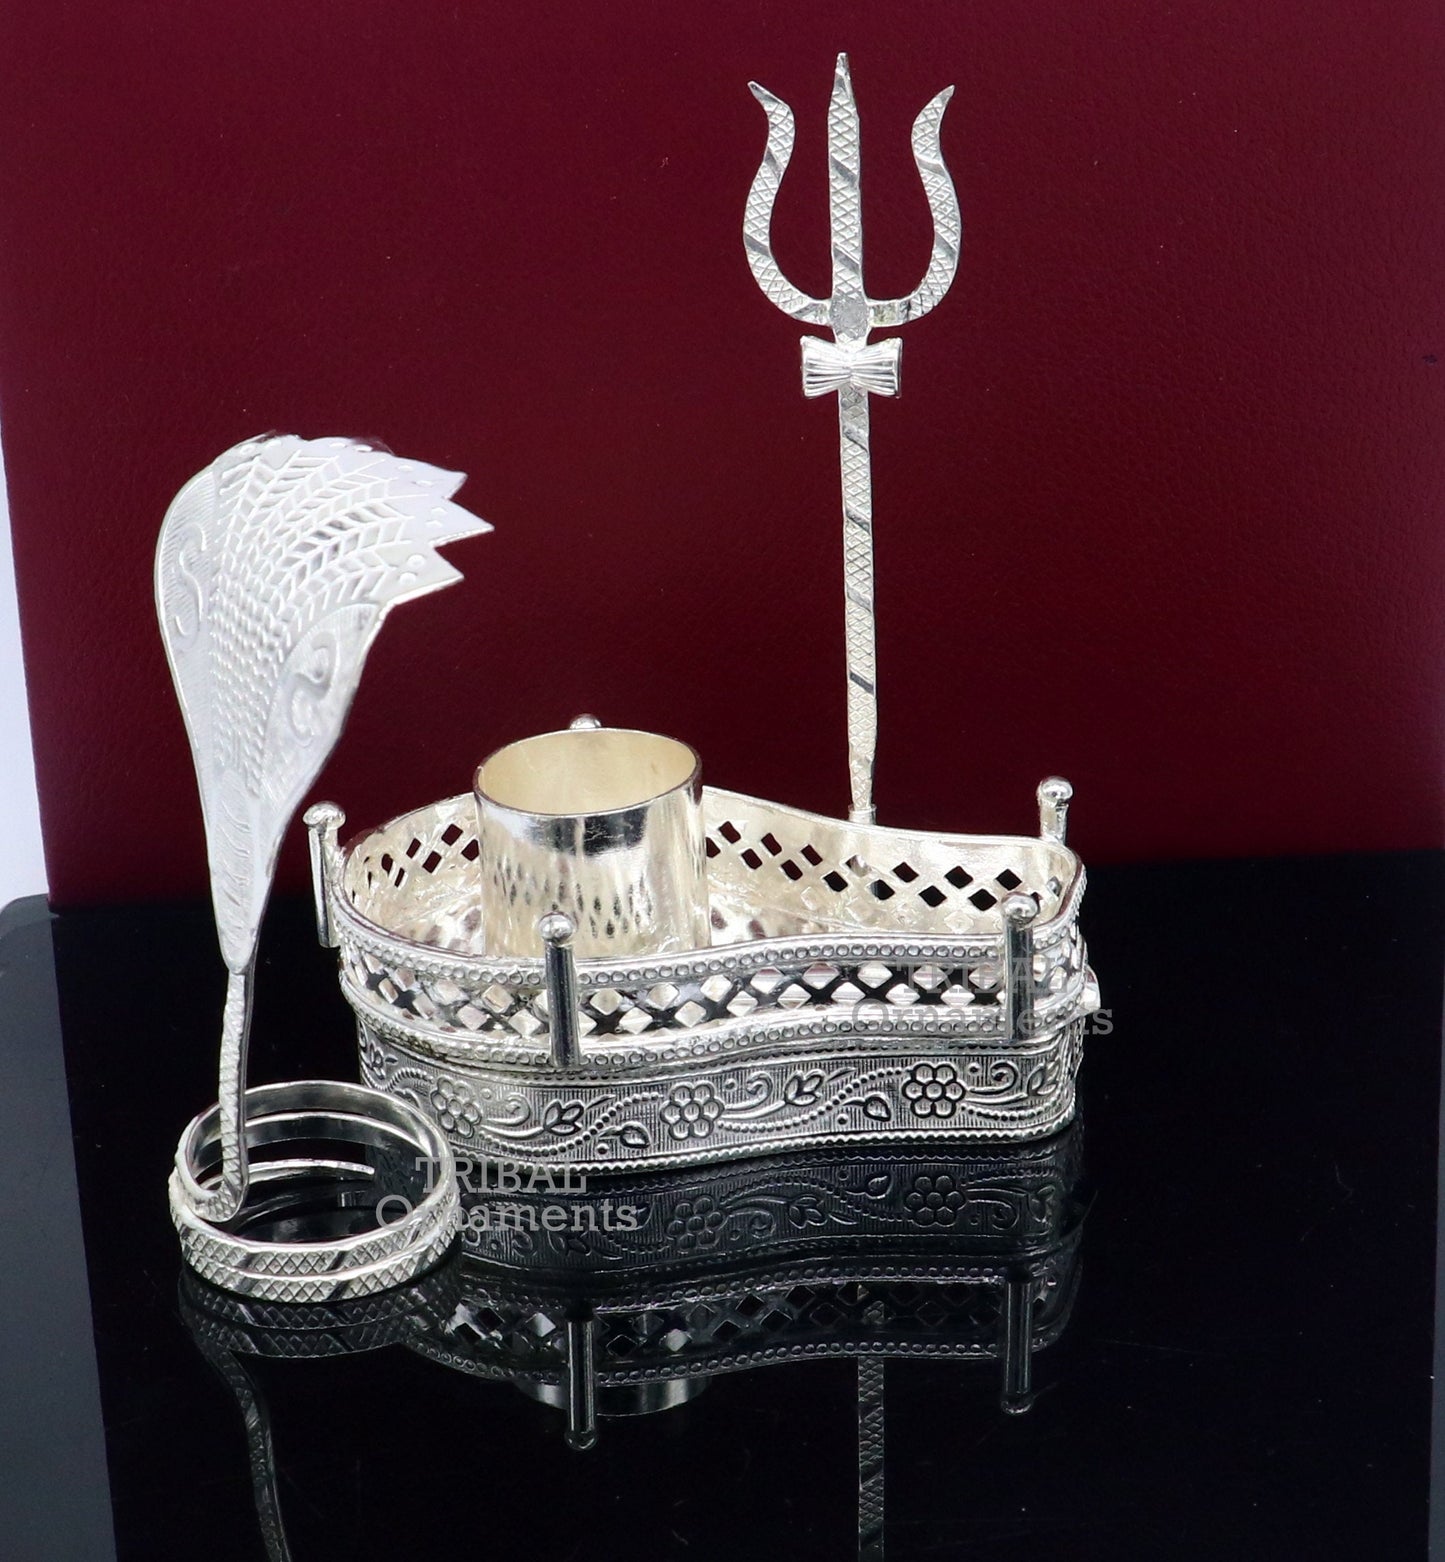 925 sterling silver handmade lord shiva lingam stand/ jalheri with panchmukhi snake (5 face snake) and trident mahakal lingam stand su787 - TRIBAL ORNAMENTS